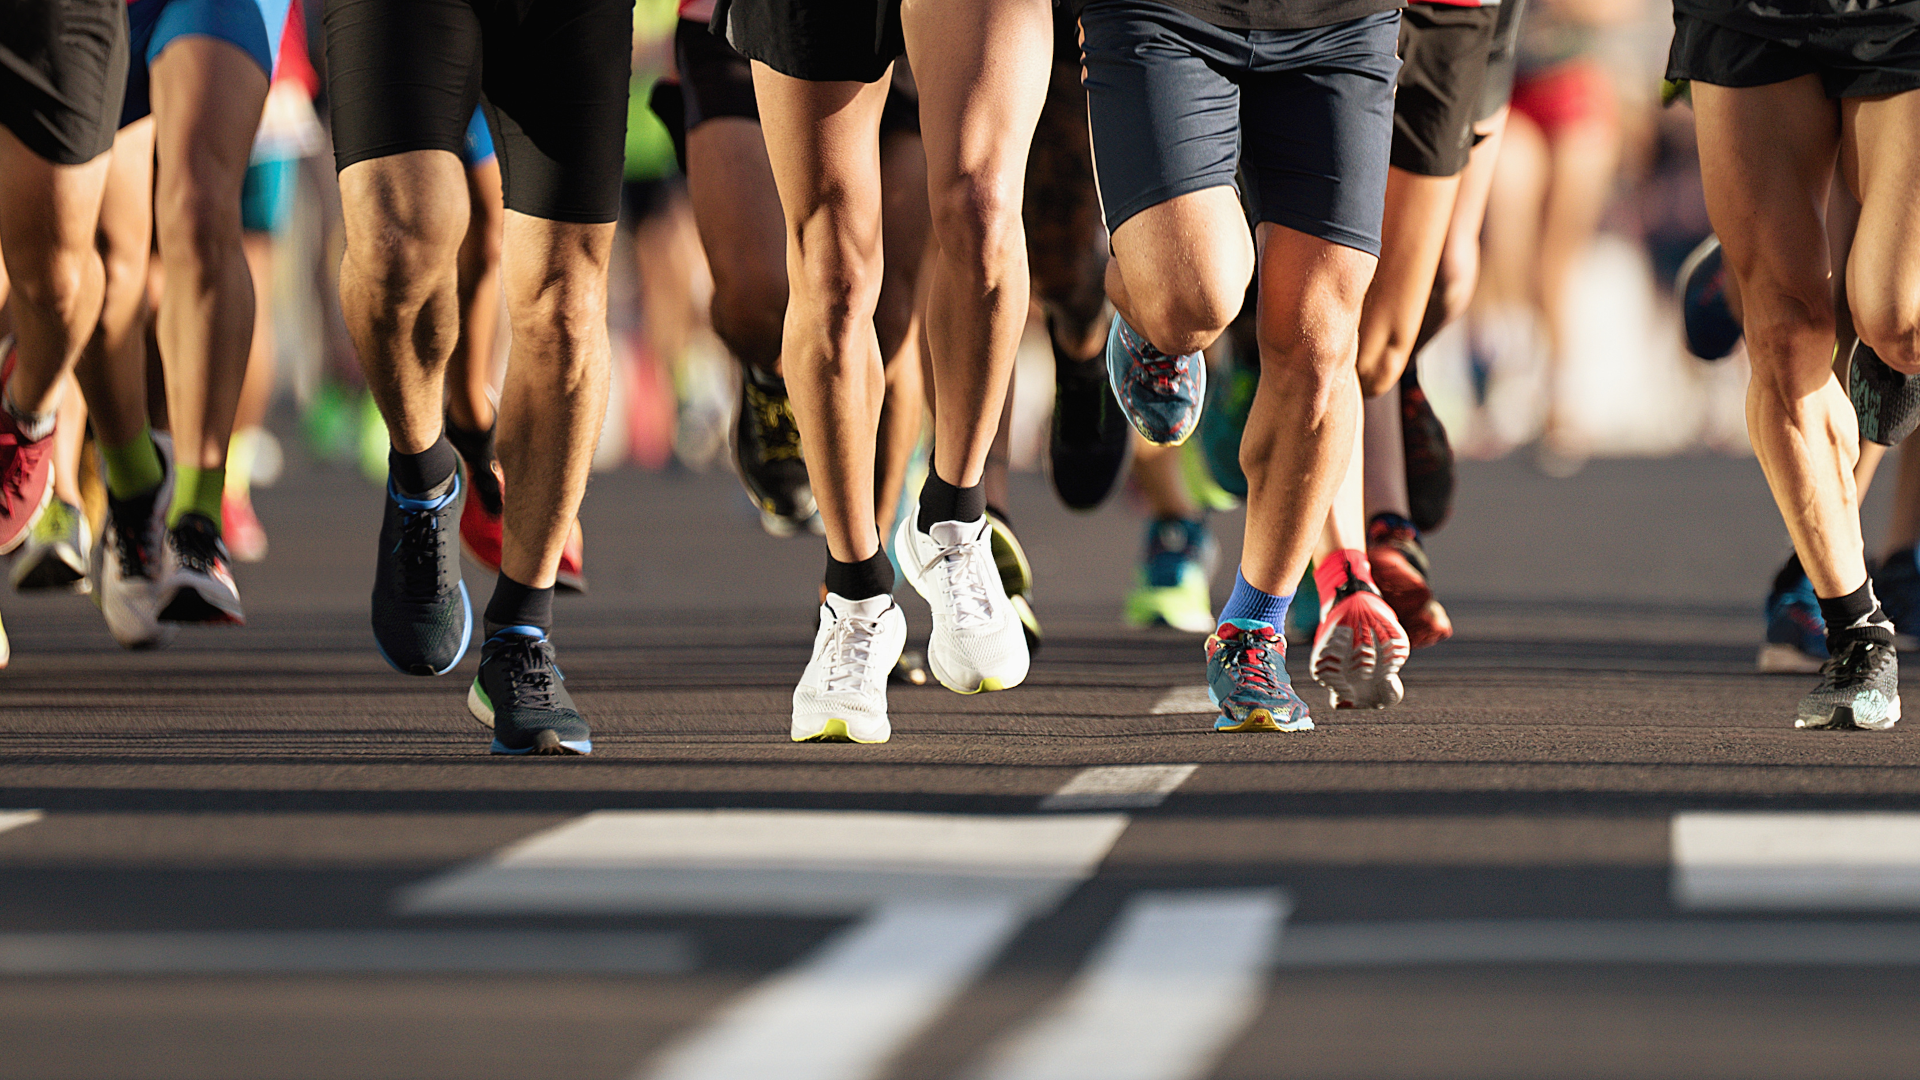 10 Essential Marathon Training Tips For First-Time Runners